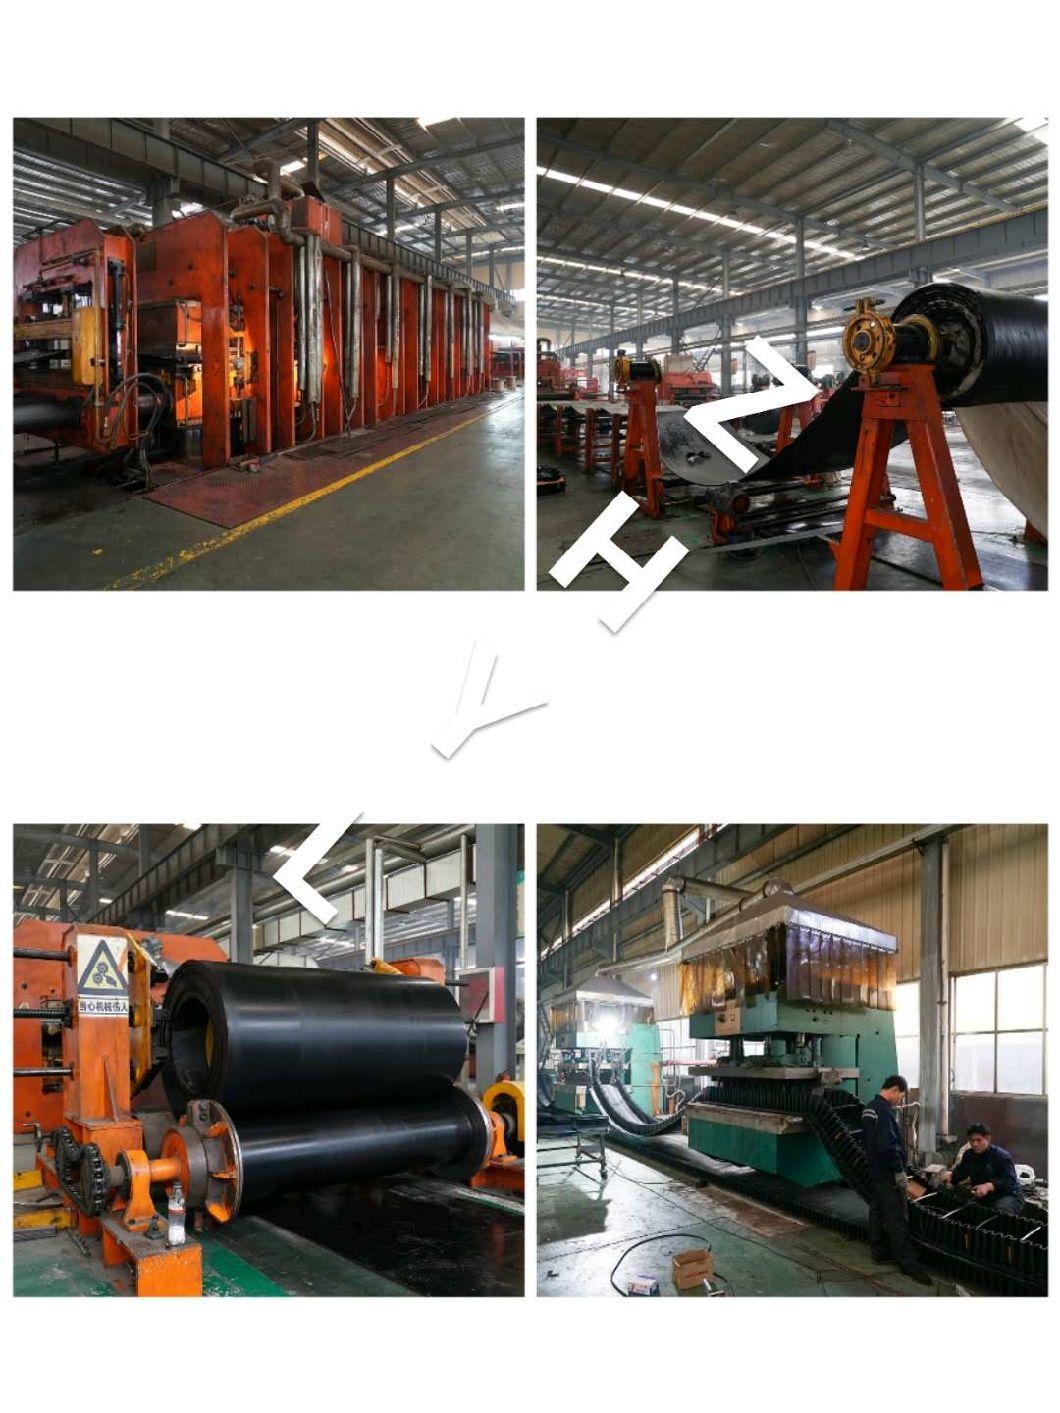 Endless Sidewall Rubber Belting Conveyor with Guide for Coal Feeder Use